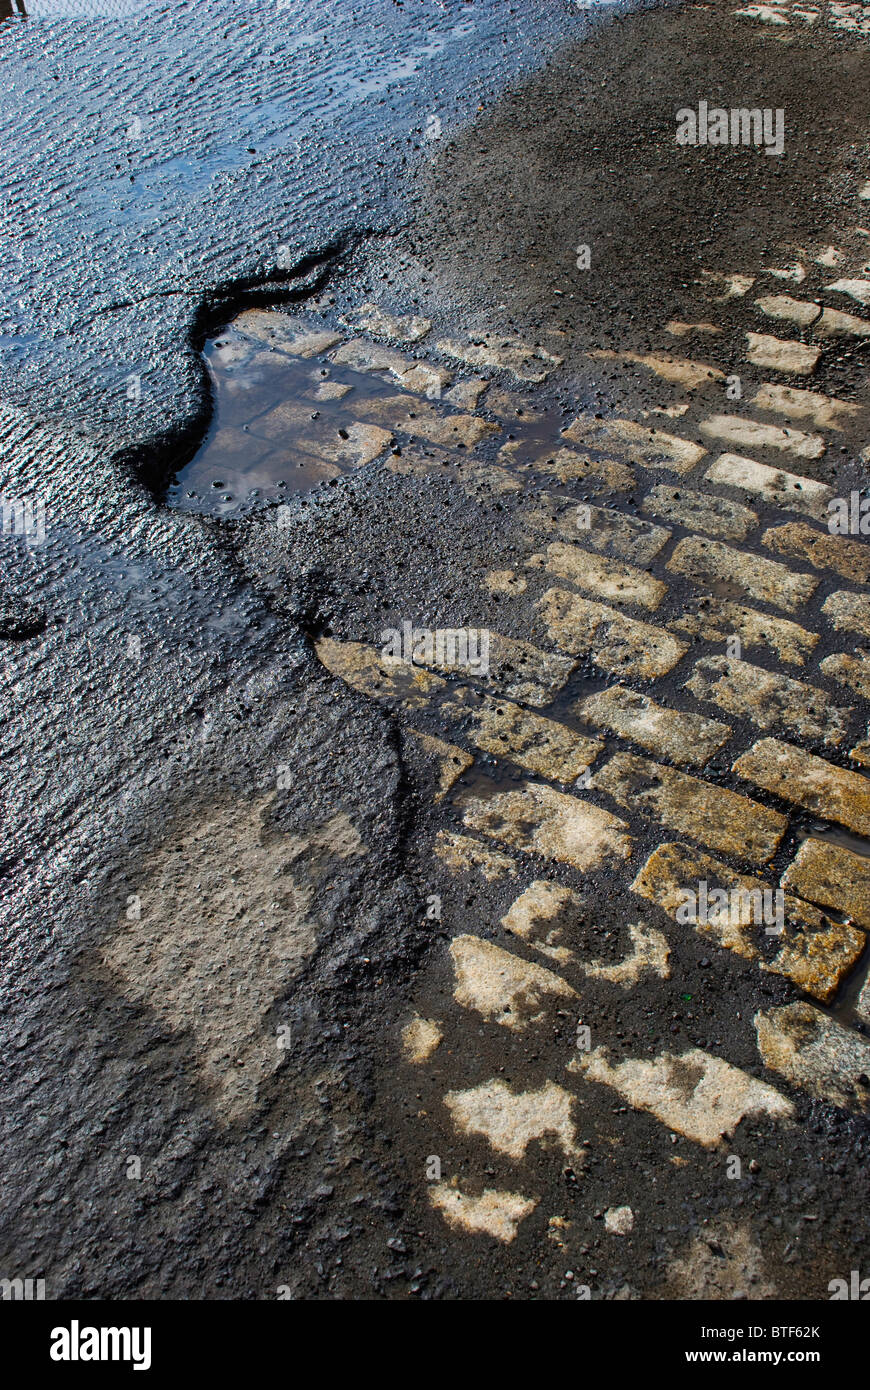 Exposed old stone foundation road beneath roughed macadam awaits resurfacing after a rain. Stock Photo